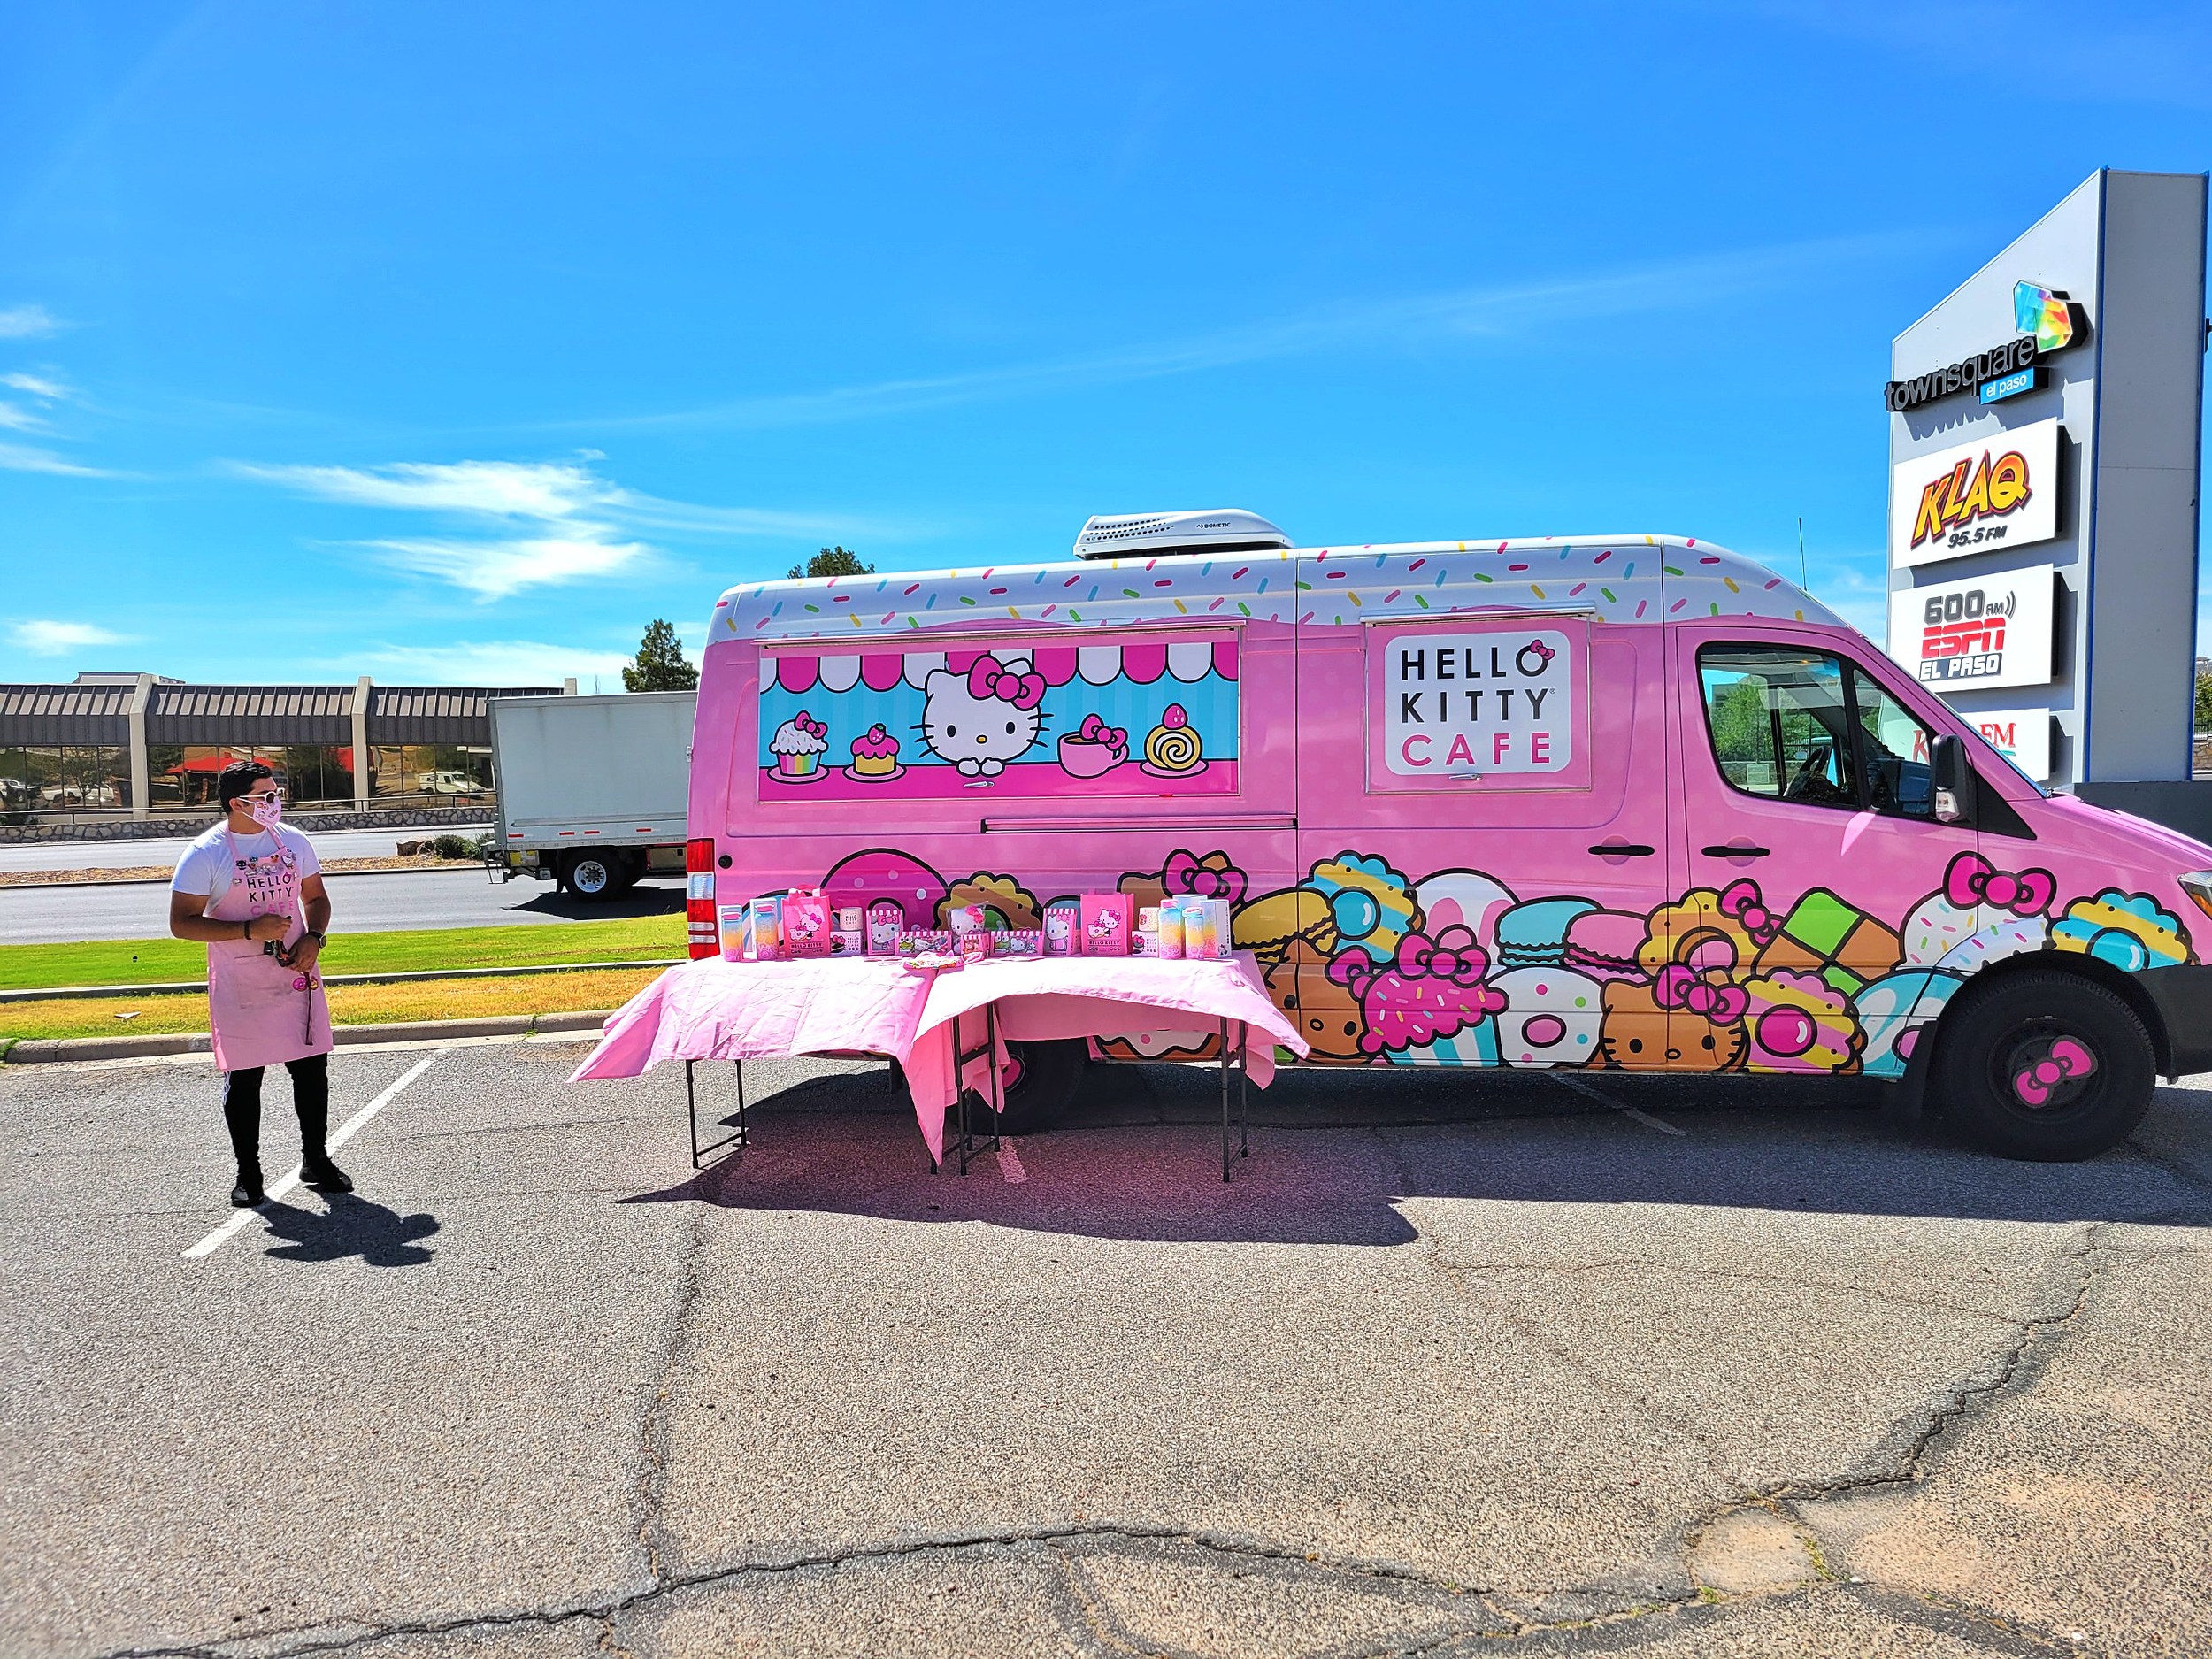 Hello Kitty Cafe Truck rolls into The Rim this weekend